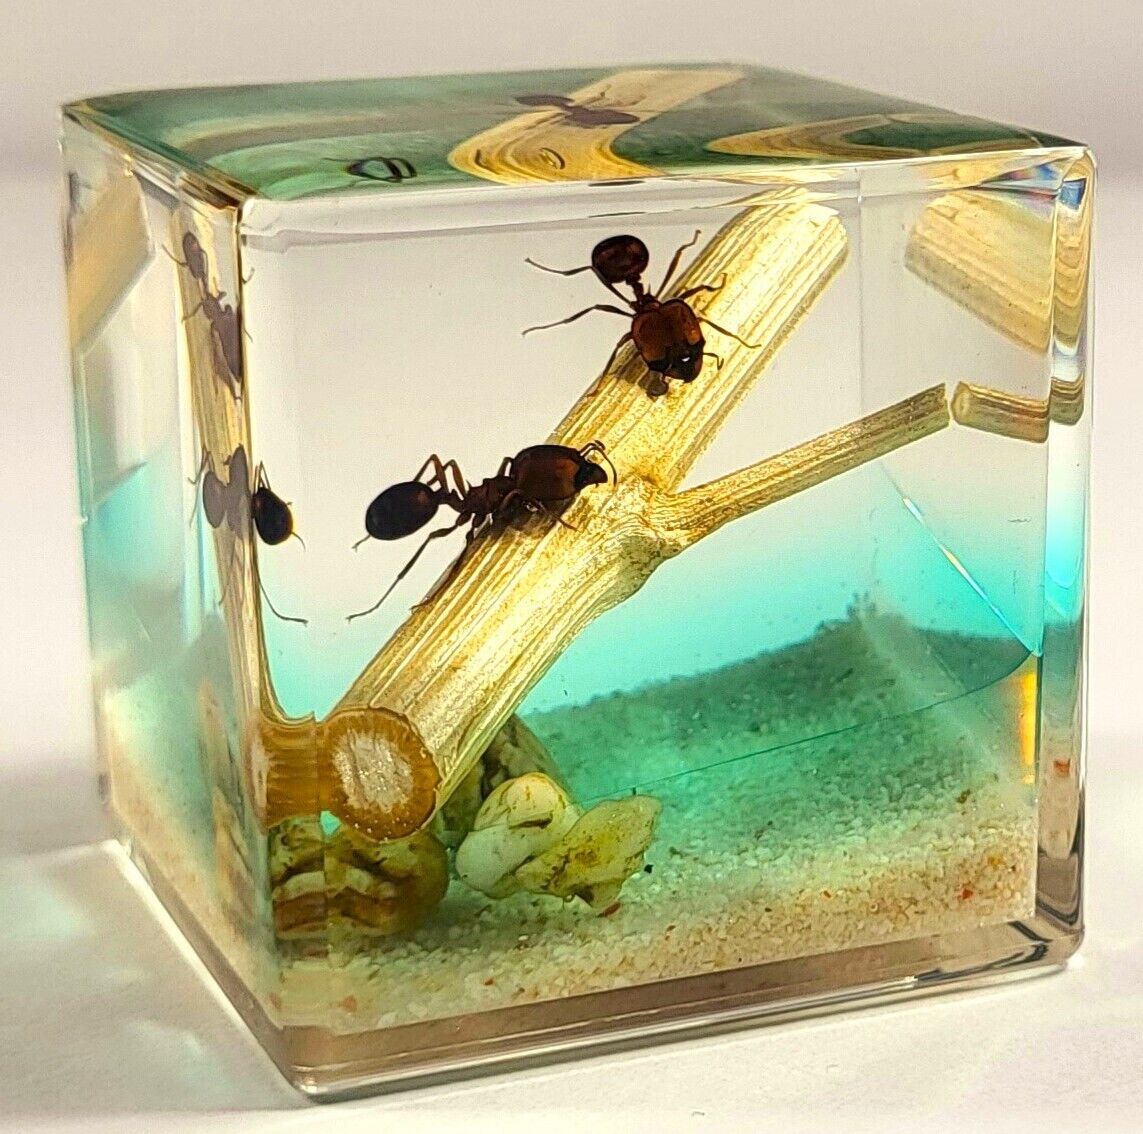 40mm Real Pair Ants in Nature in Clear Lucite Resin Diorama Paperweight Display